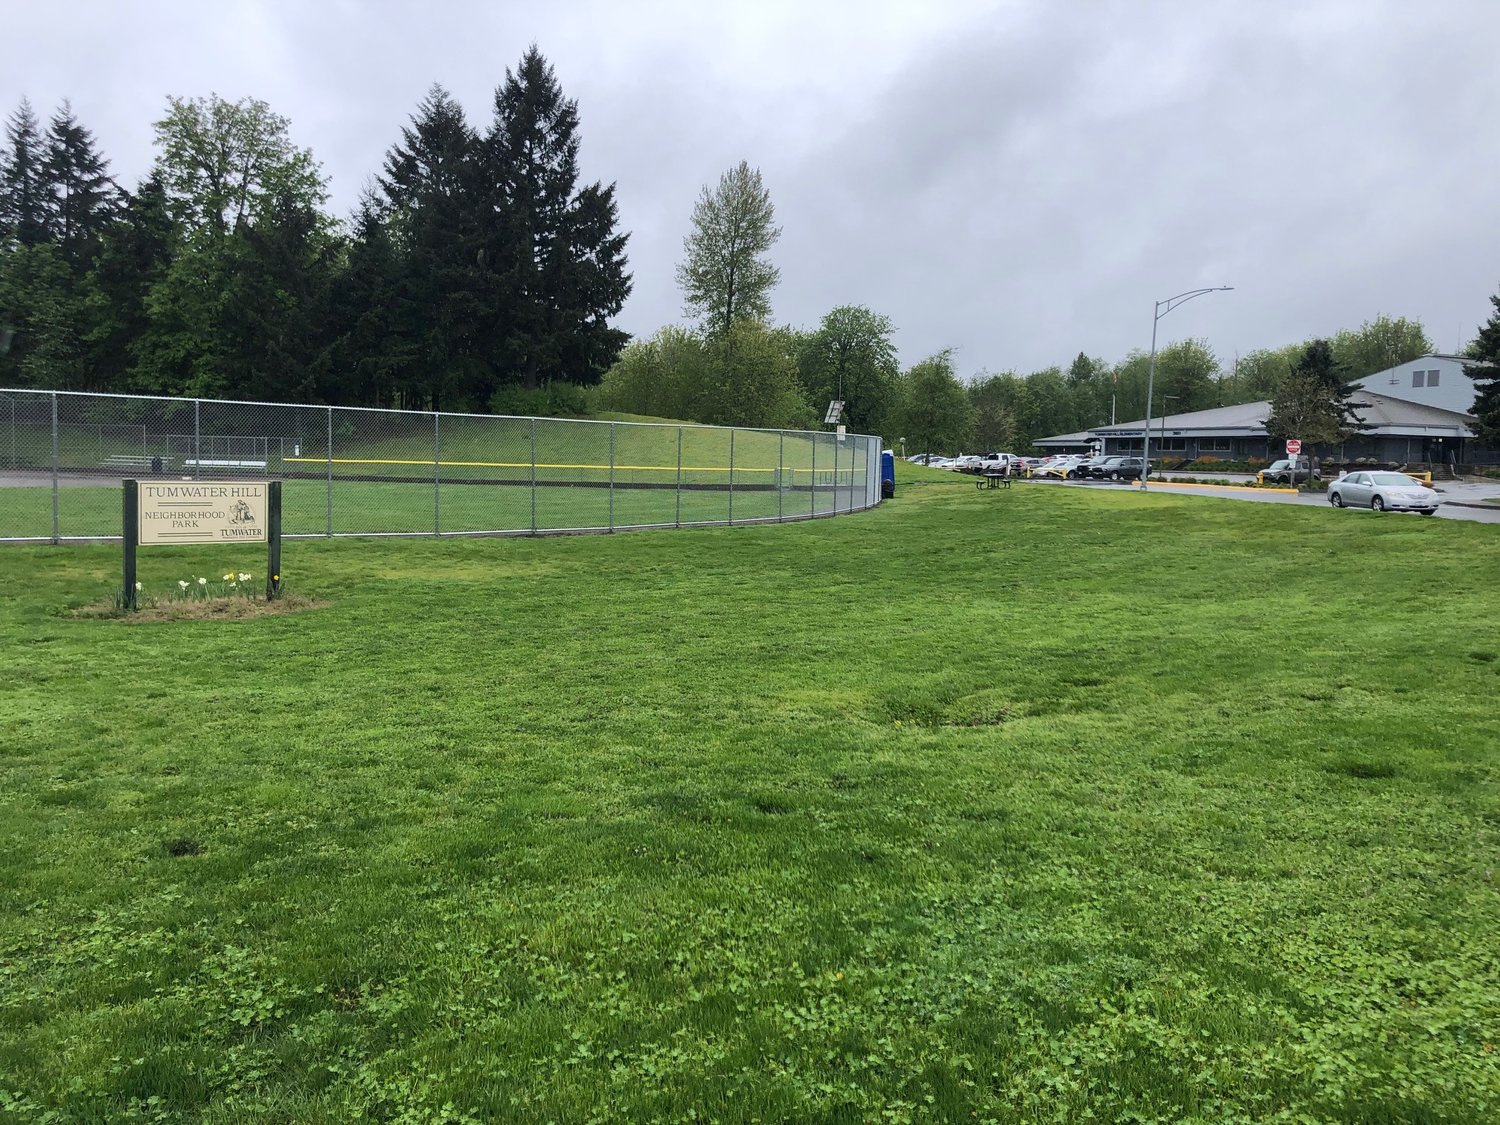 Tumwater Hill Neighborhood Park, next to Tumwater Hill Elementary School, will receive a prefabricated restroom under the plans approved by the city council on May 3, 2022.